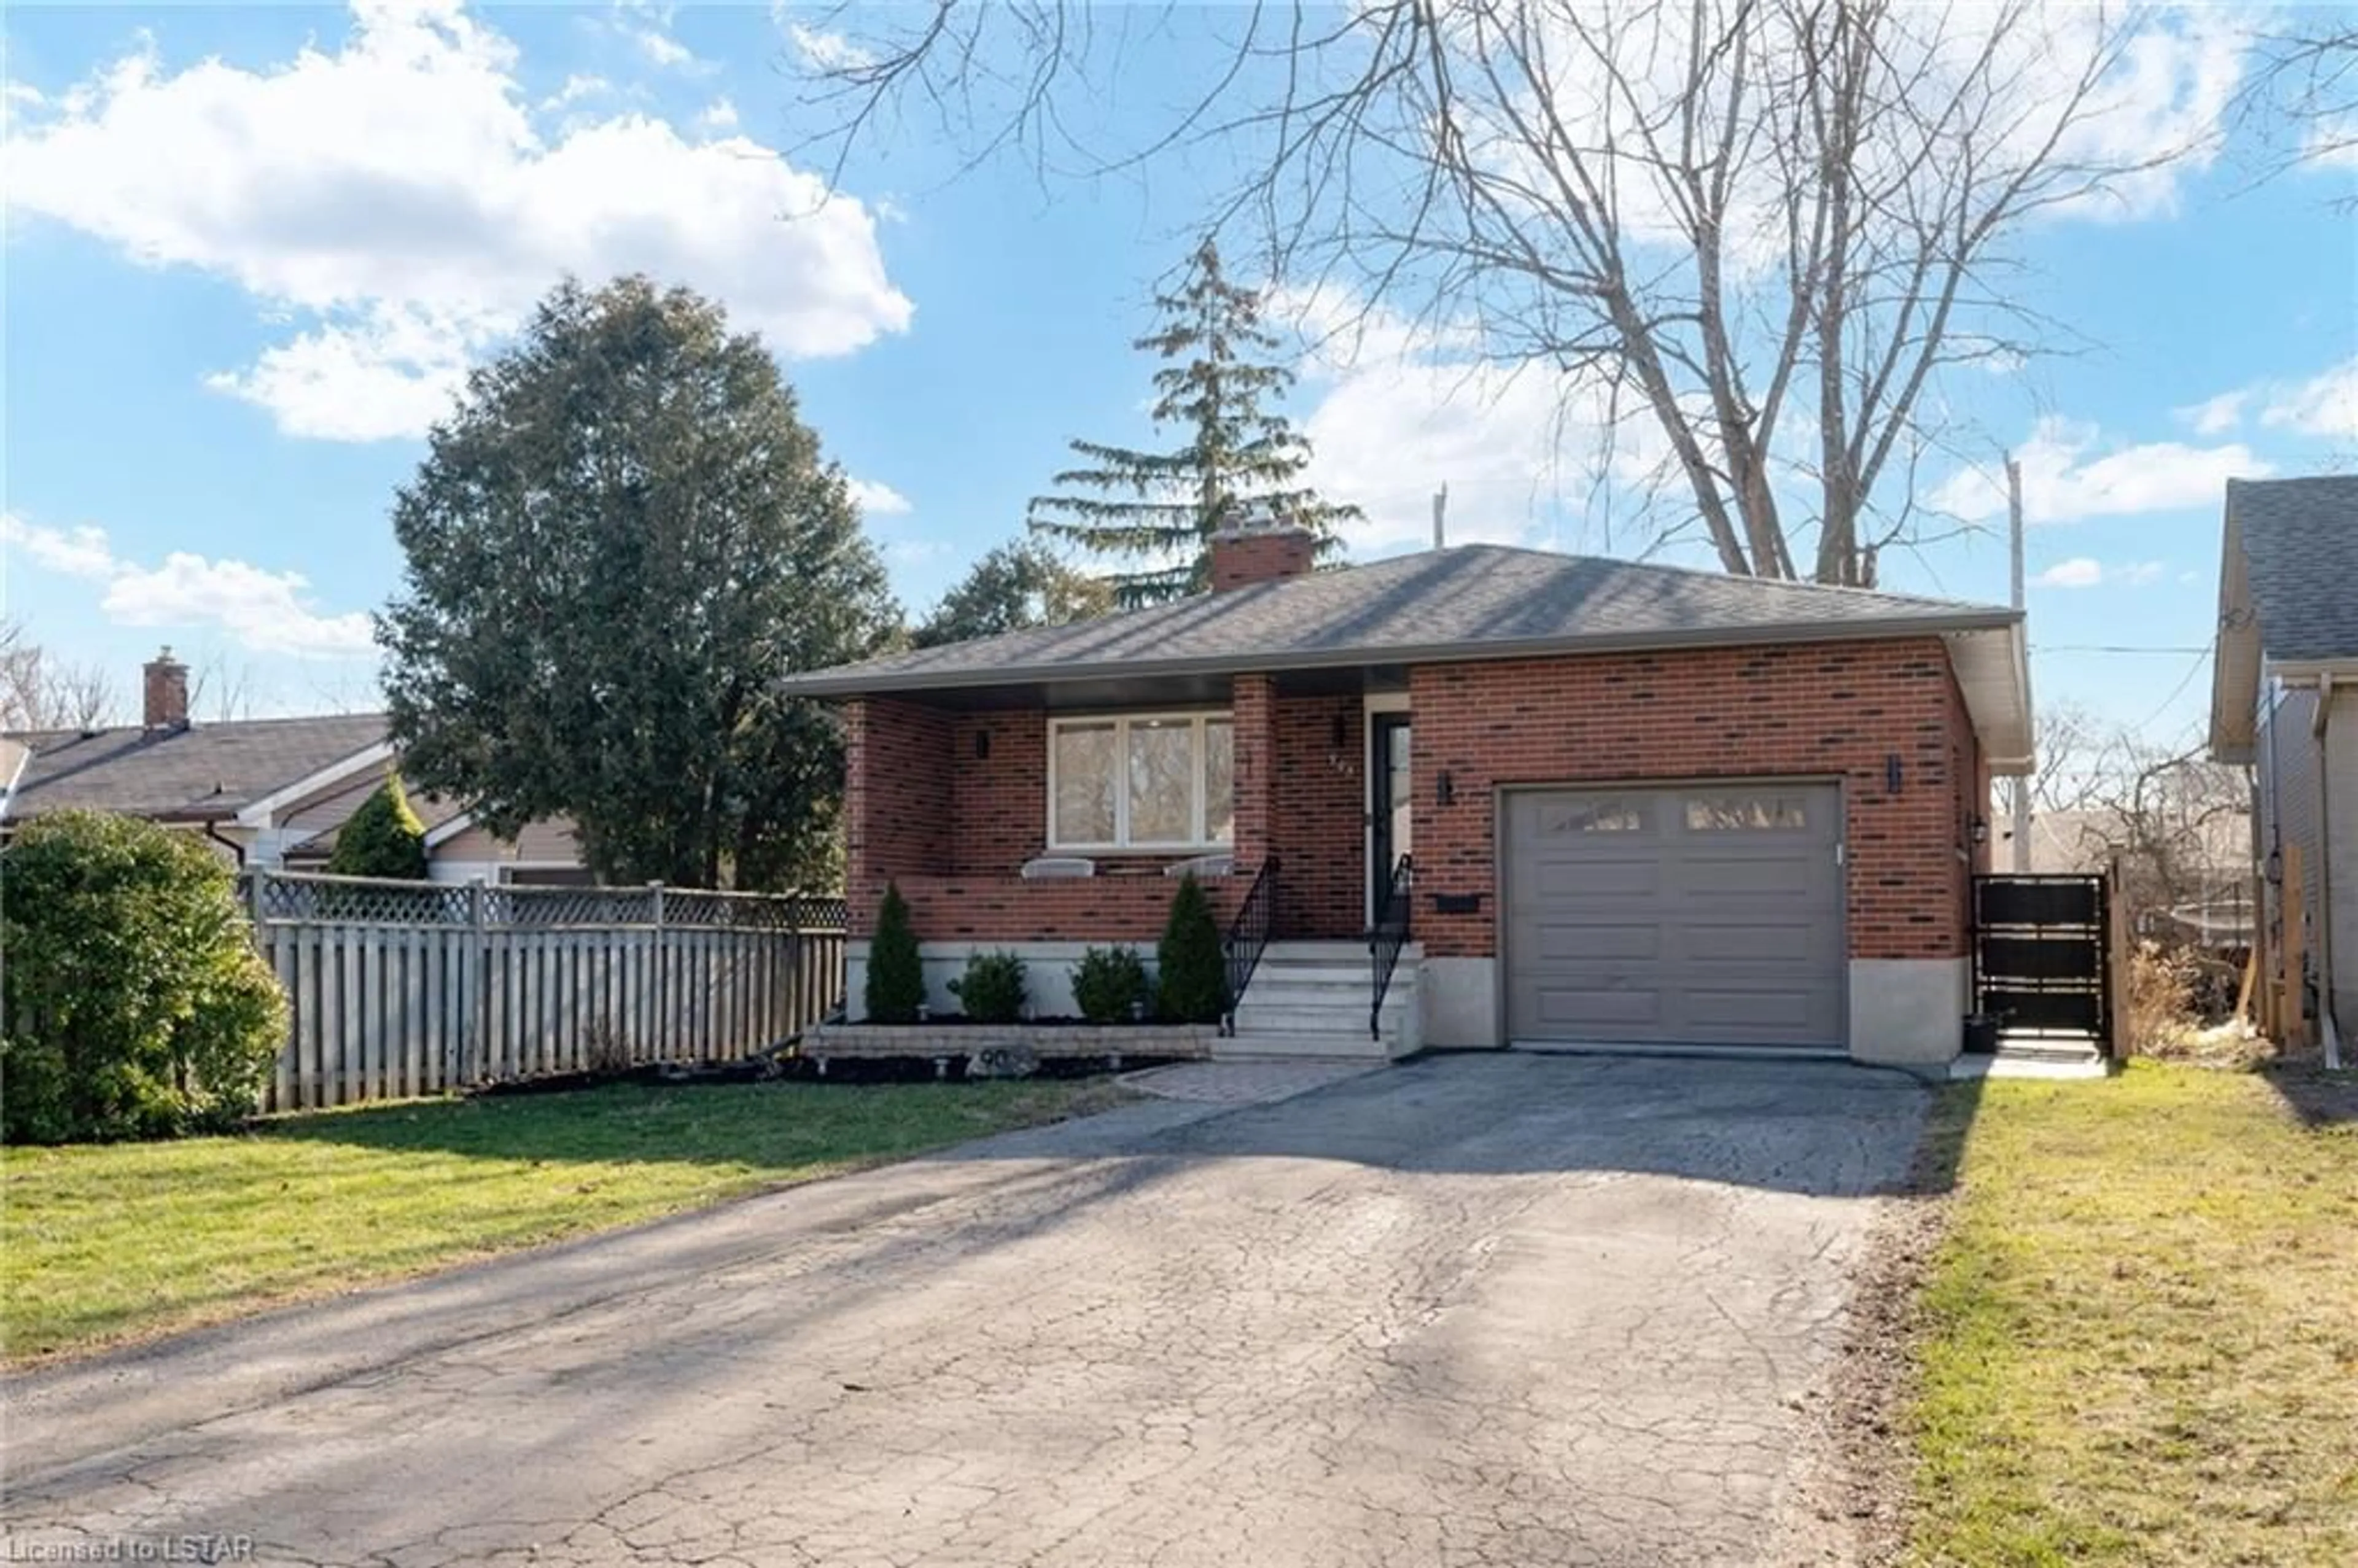 Frontside or backside of a home for 905 Wellingsboro Rd, London Ontario N6E 1N4